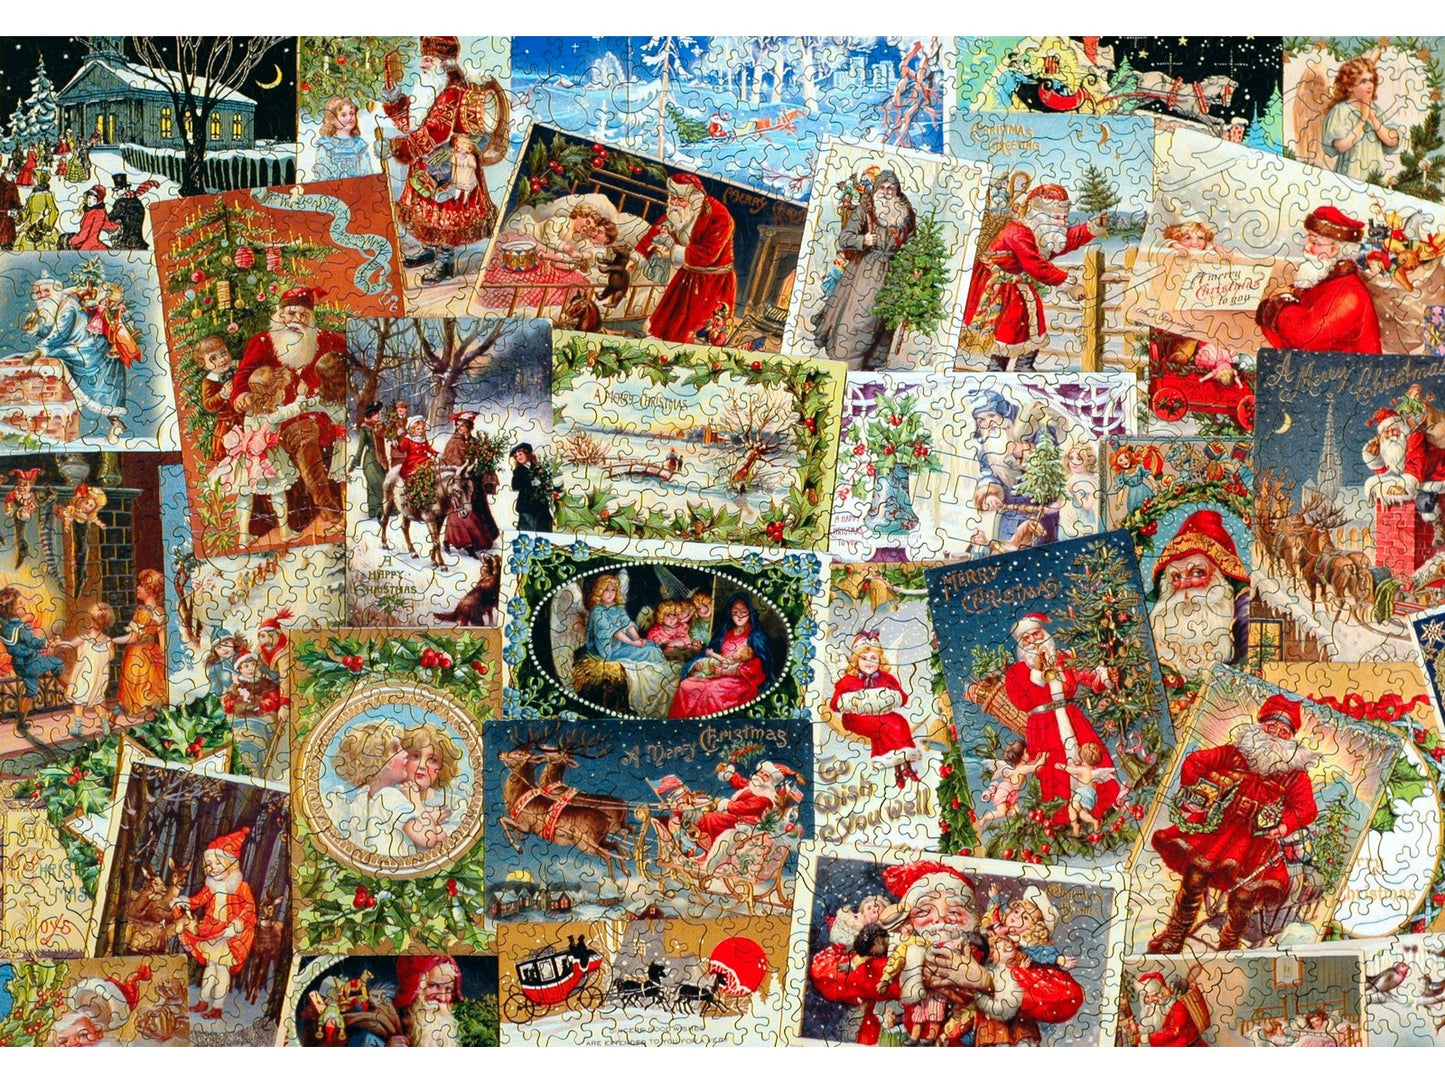 The front of the puzzle, Vintage Christmas Postcards, which shows a collage of different vintage holiday postcards.